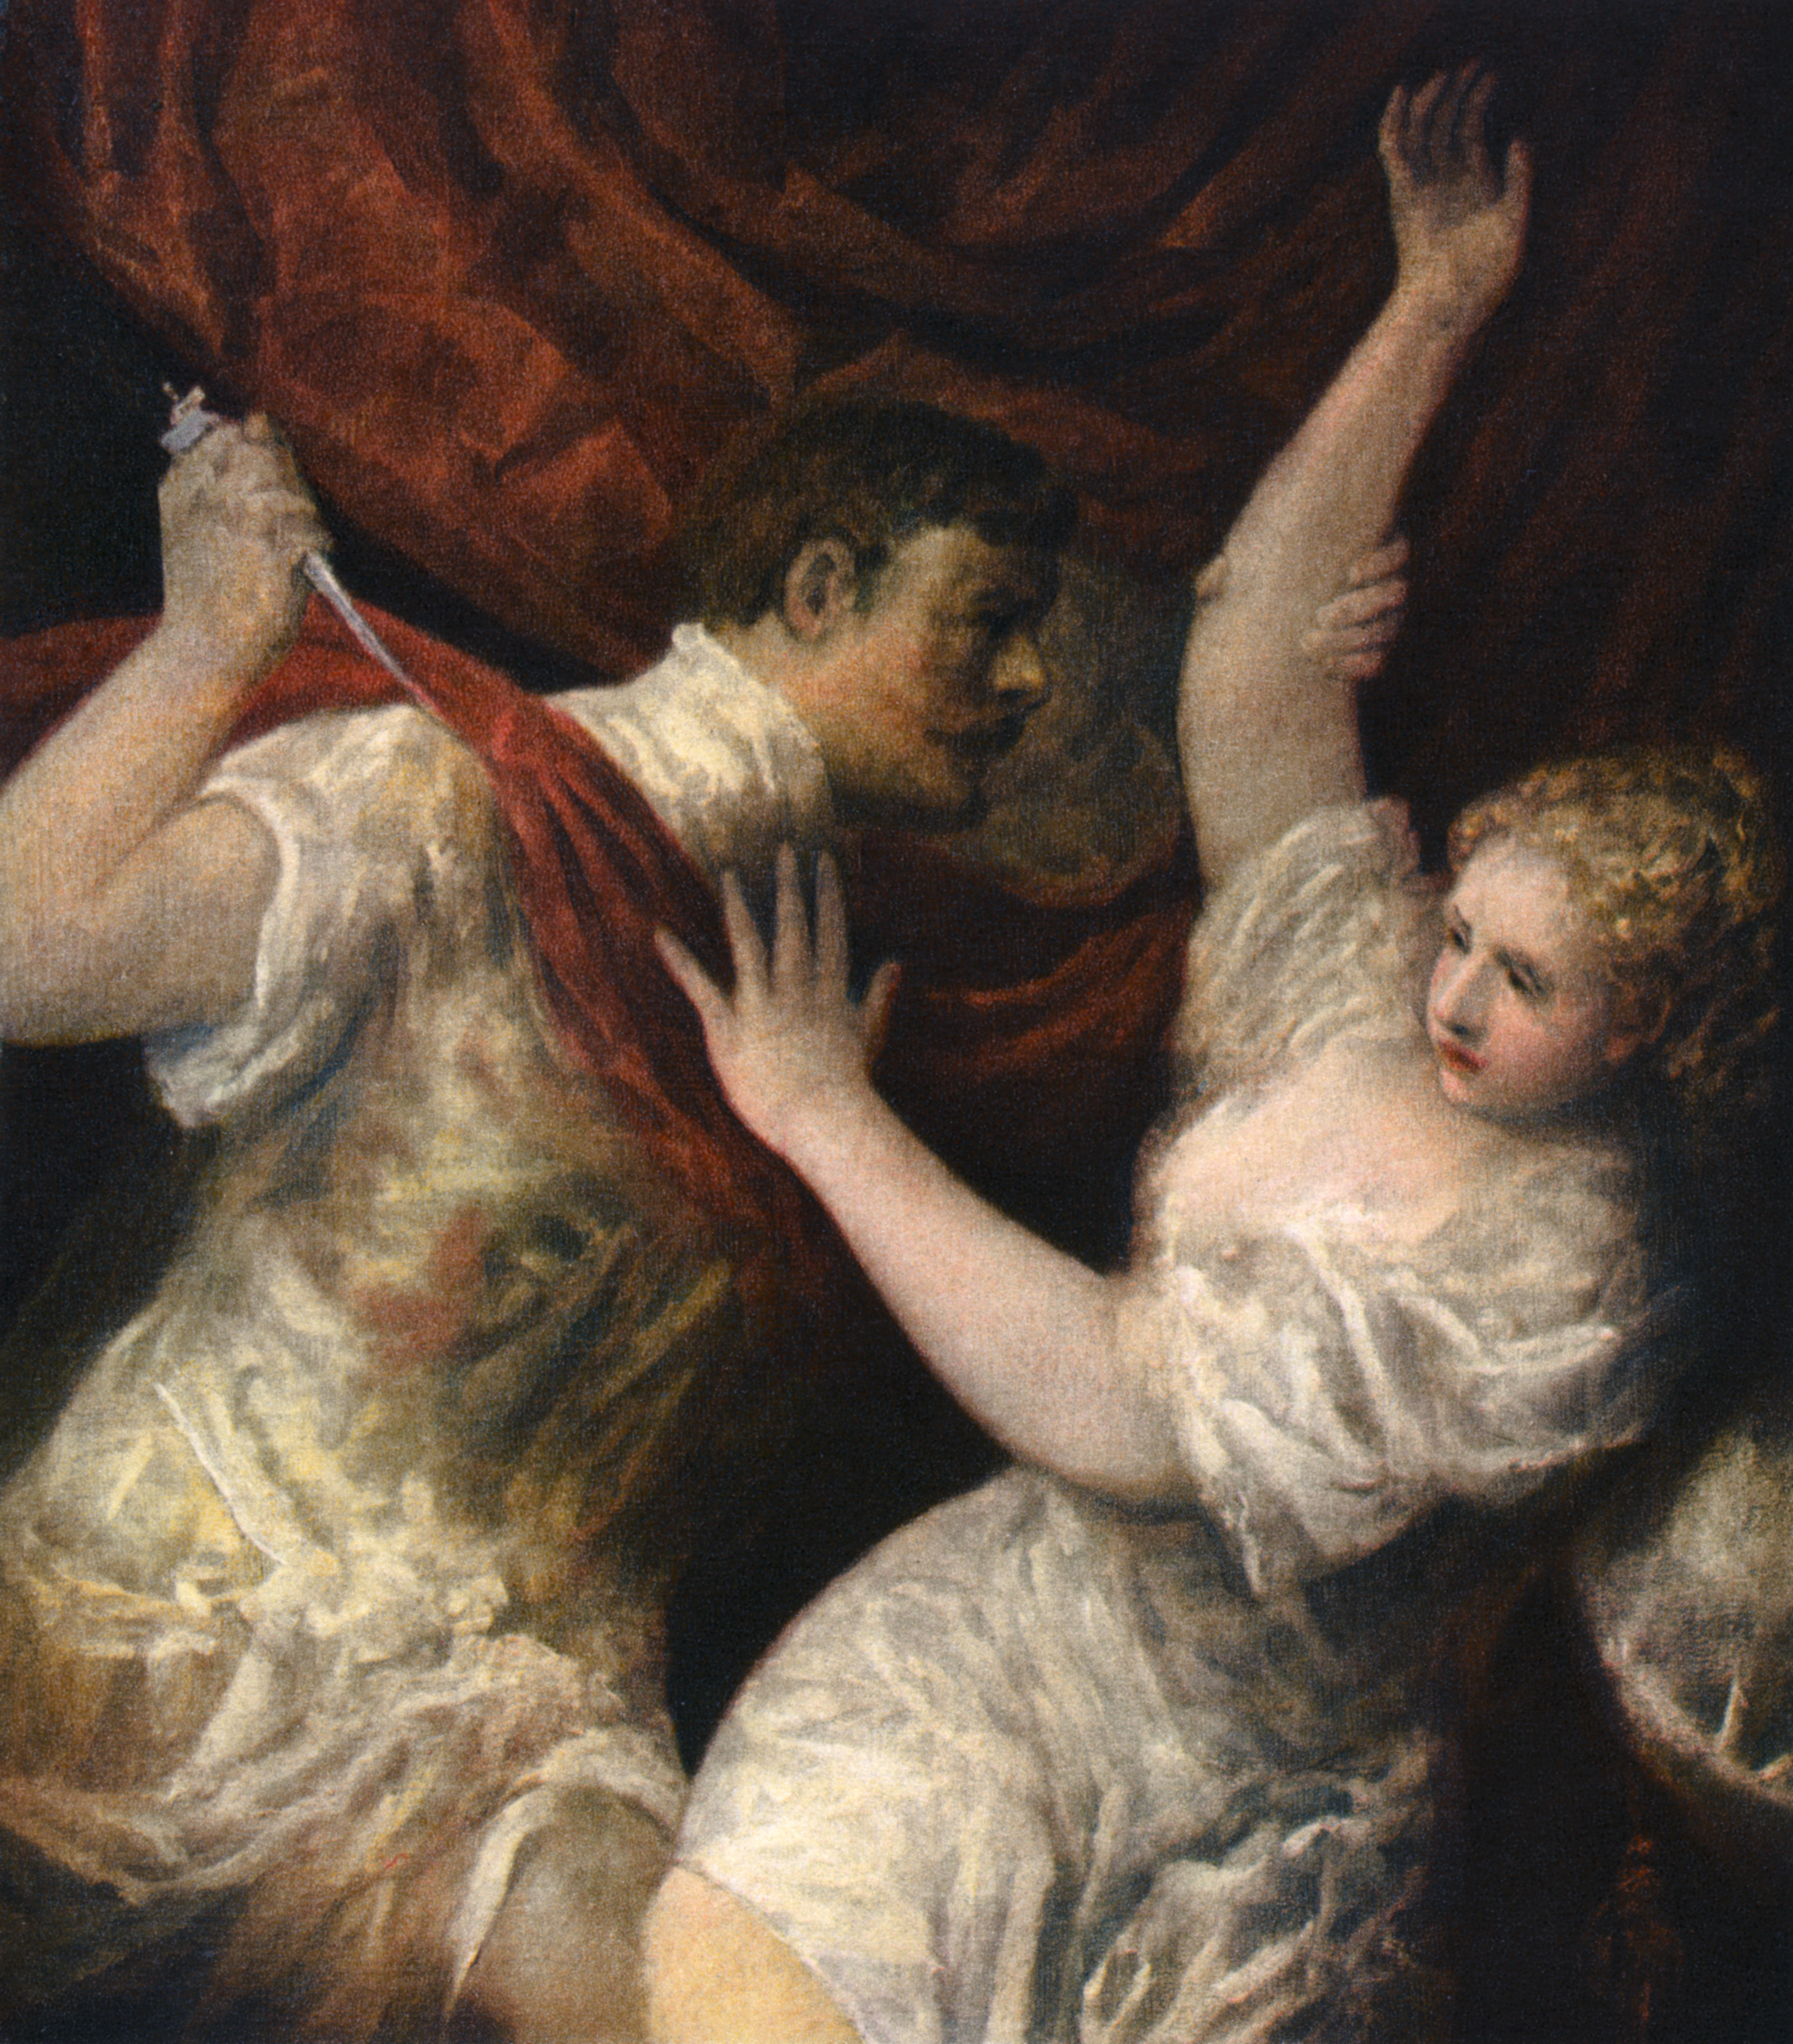 'Lucretia and Tarquinius', c1560s, (1937). A print from Titian Paintings and Drawings, introduction by Hans Tietze, Phaidon Press, Vienna, 1937. Found in the collection of the Akademie der Bildenden Künste, Vienna, Austria. (Print Collector/Getty Images)